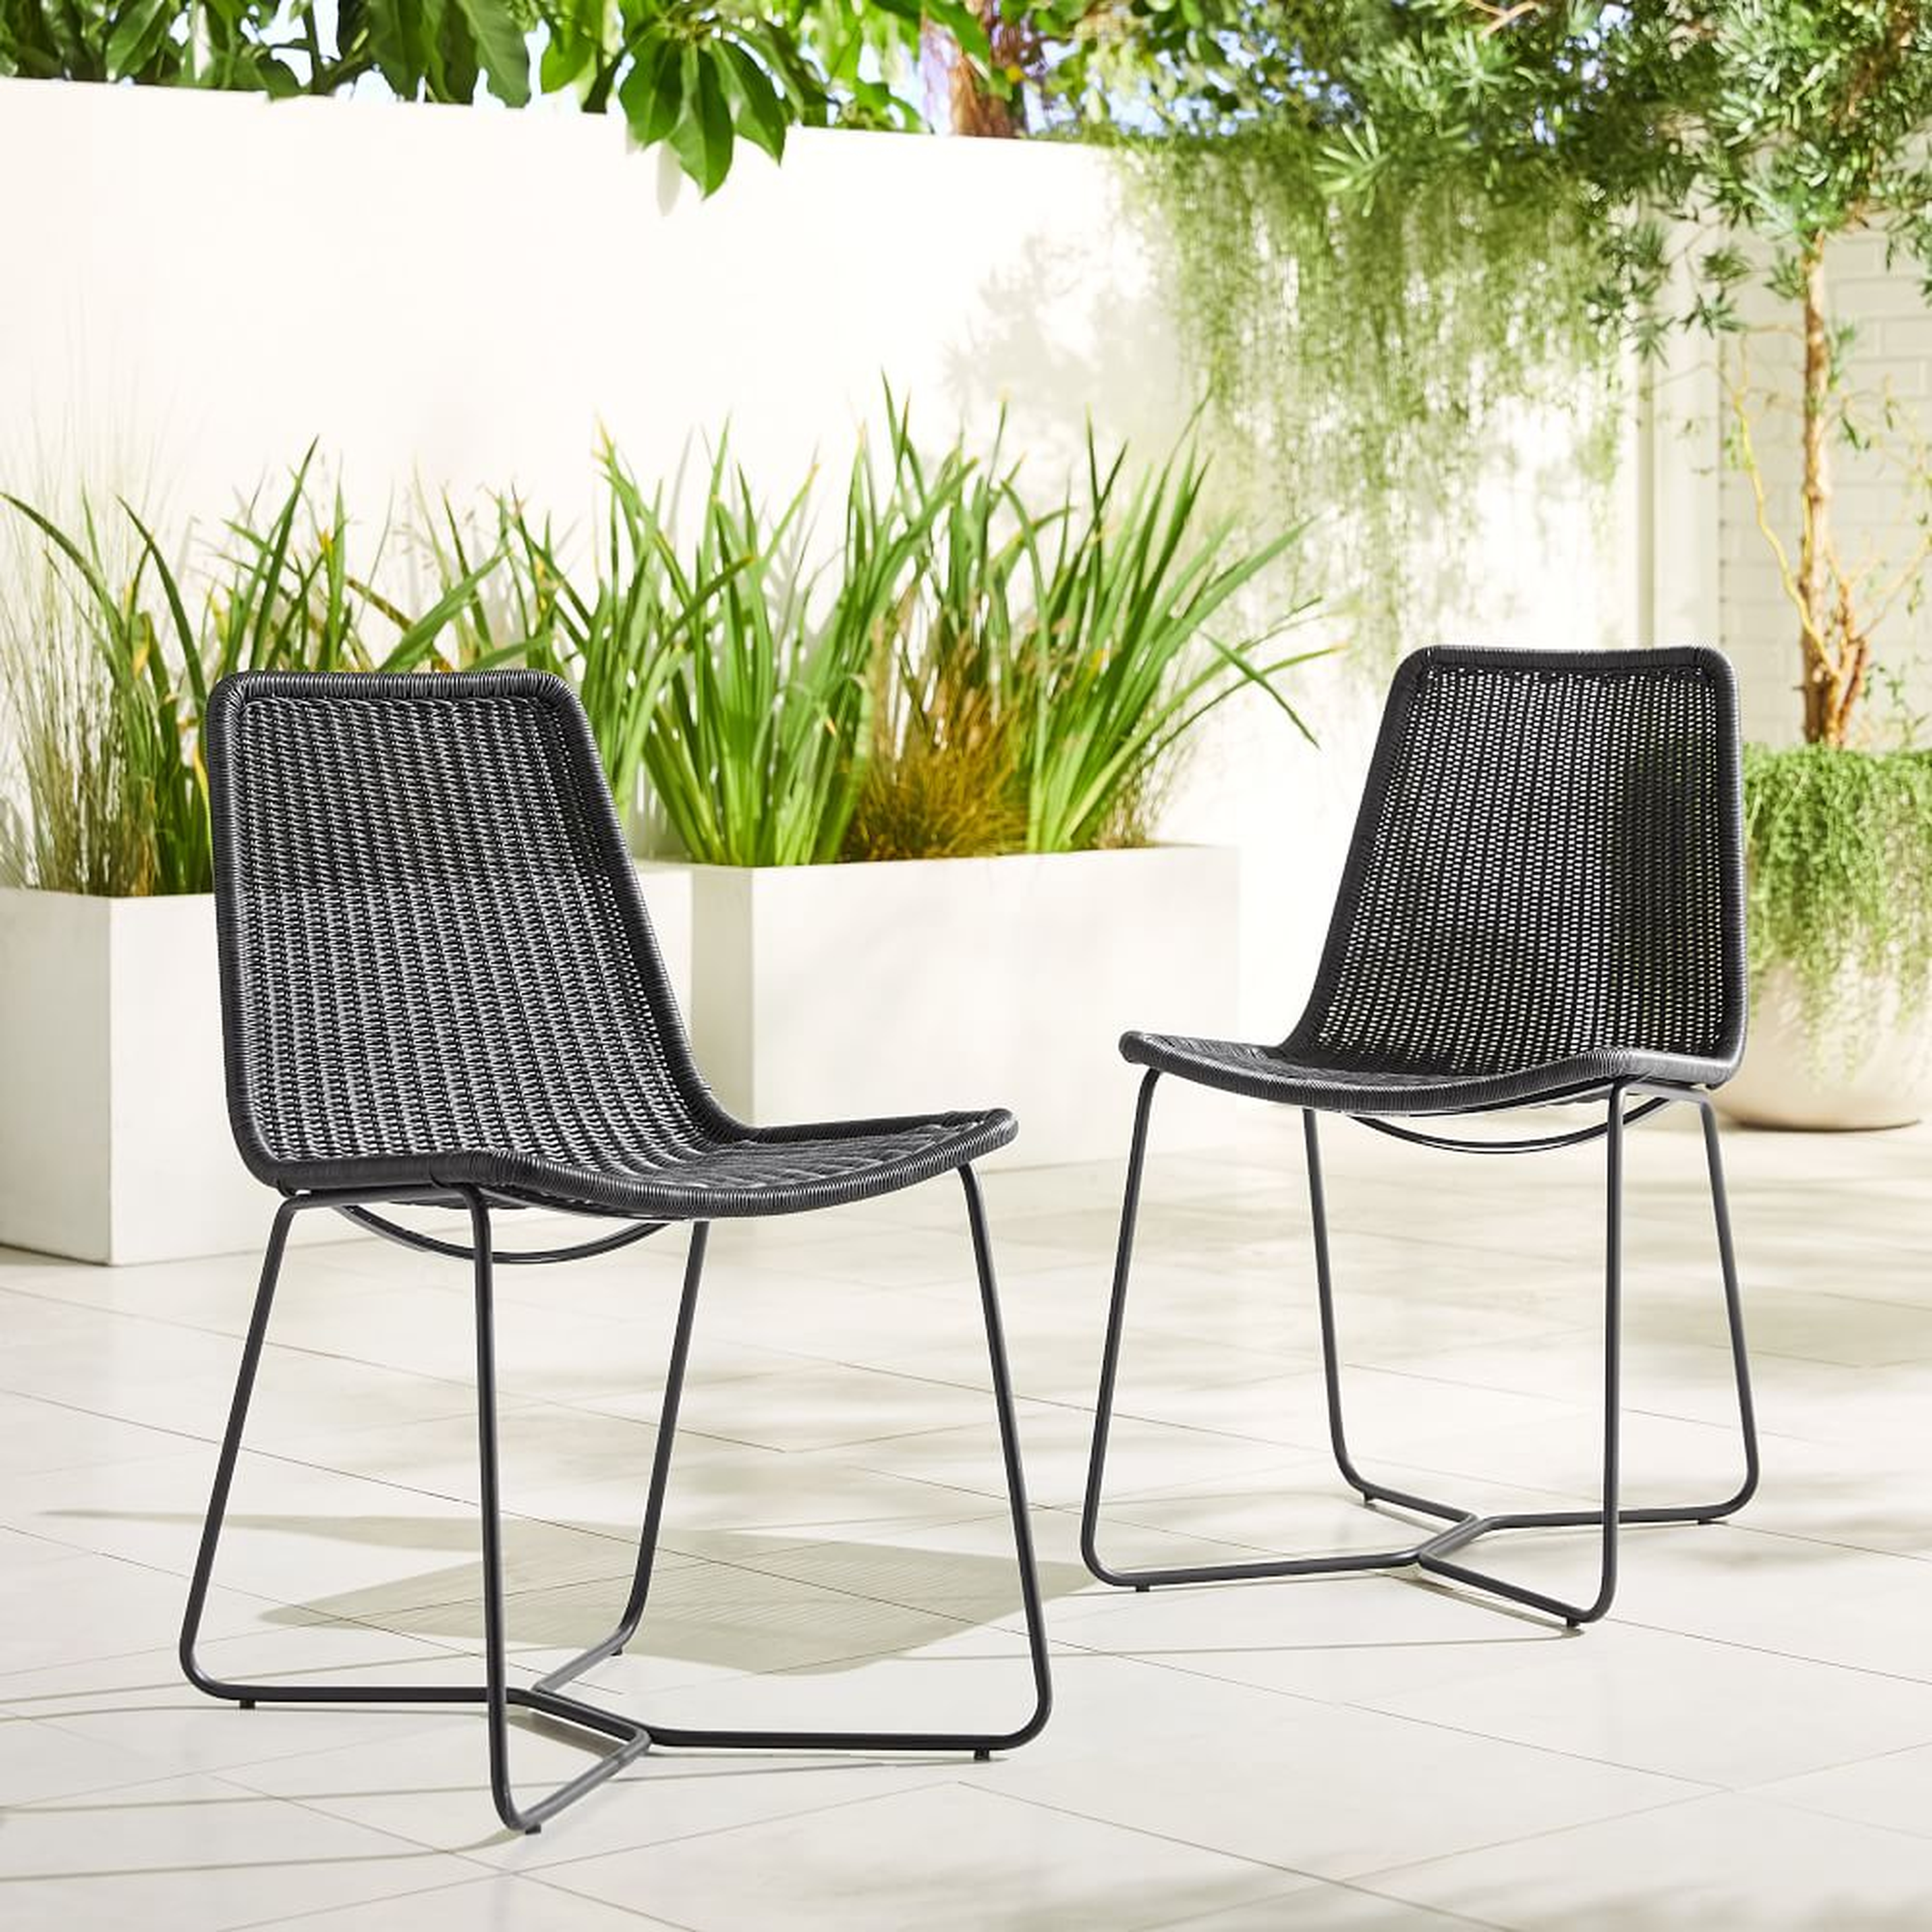 Slope Outdoor Dining Chair, Charcoal, Set of 6 - West Elm